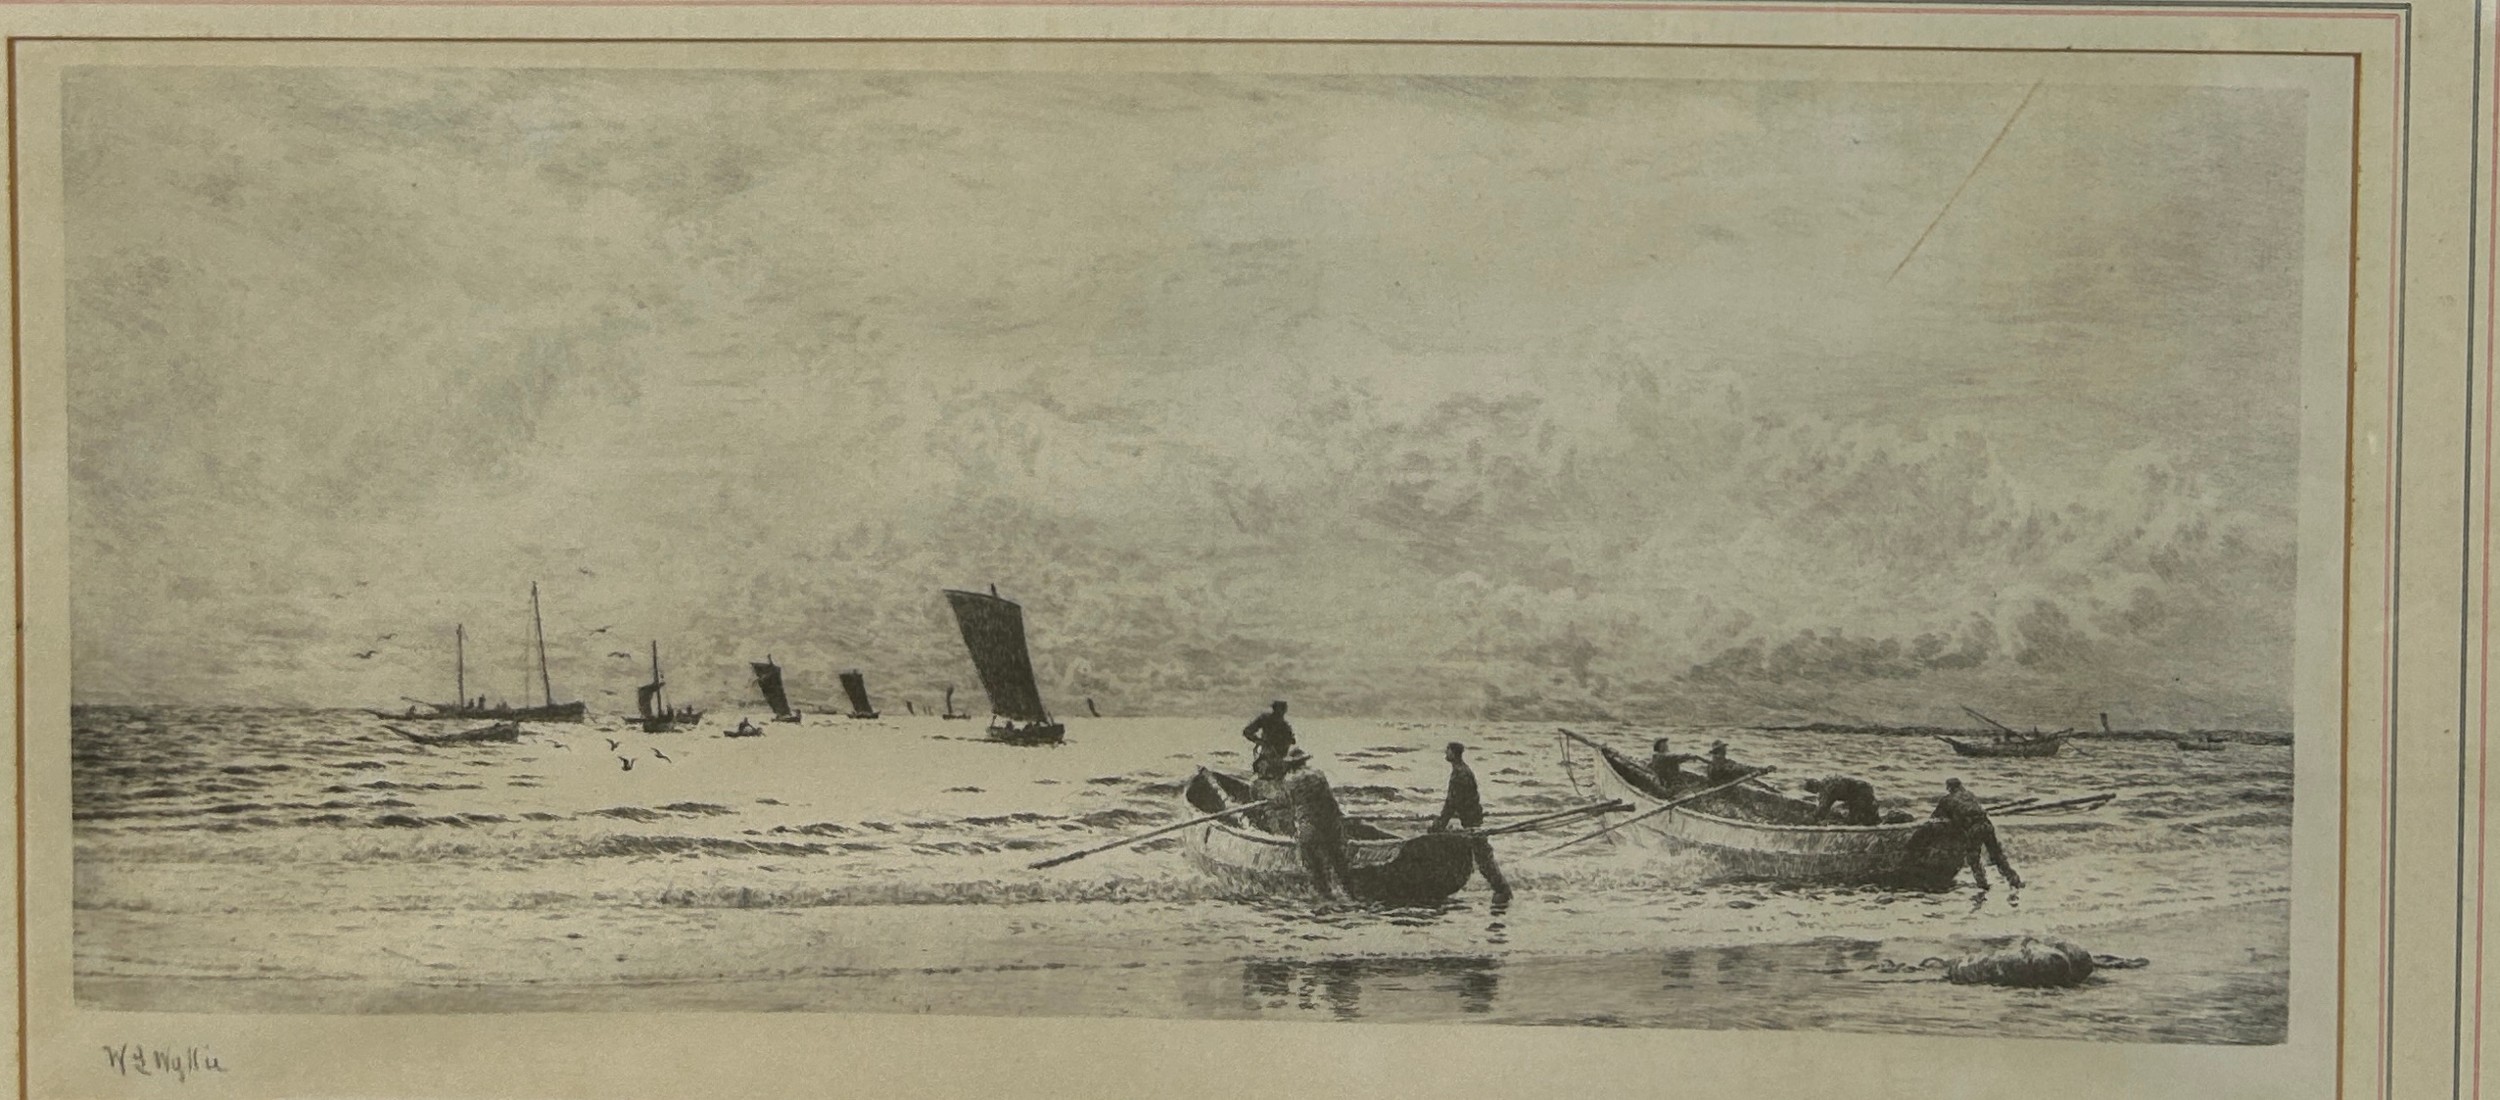 WILLIAM LIONEL WYLLIE (1851-1931): A PRINT DEPICTING A 'FISHING SCENE WITH SAILING BOATS', Signed. - Image 2 of 3